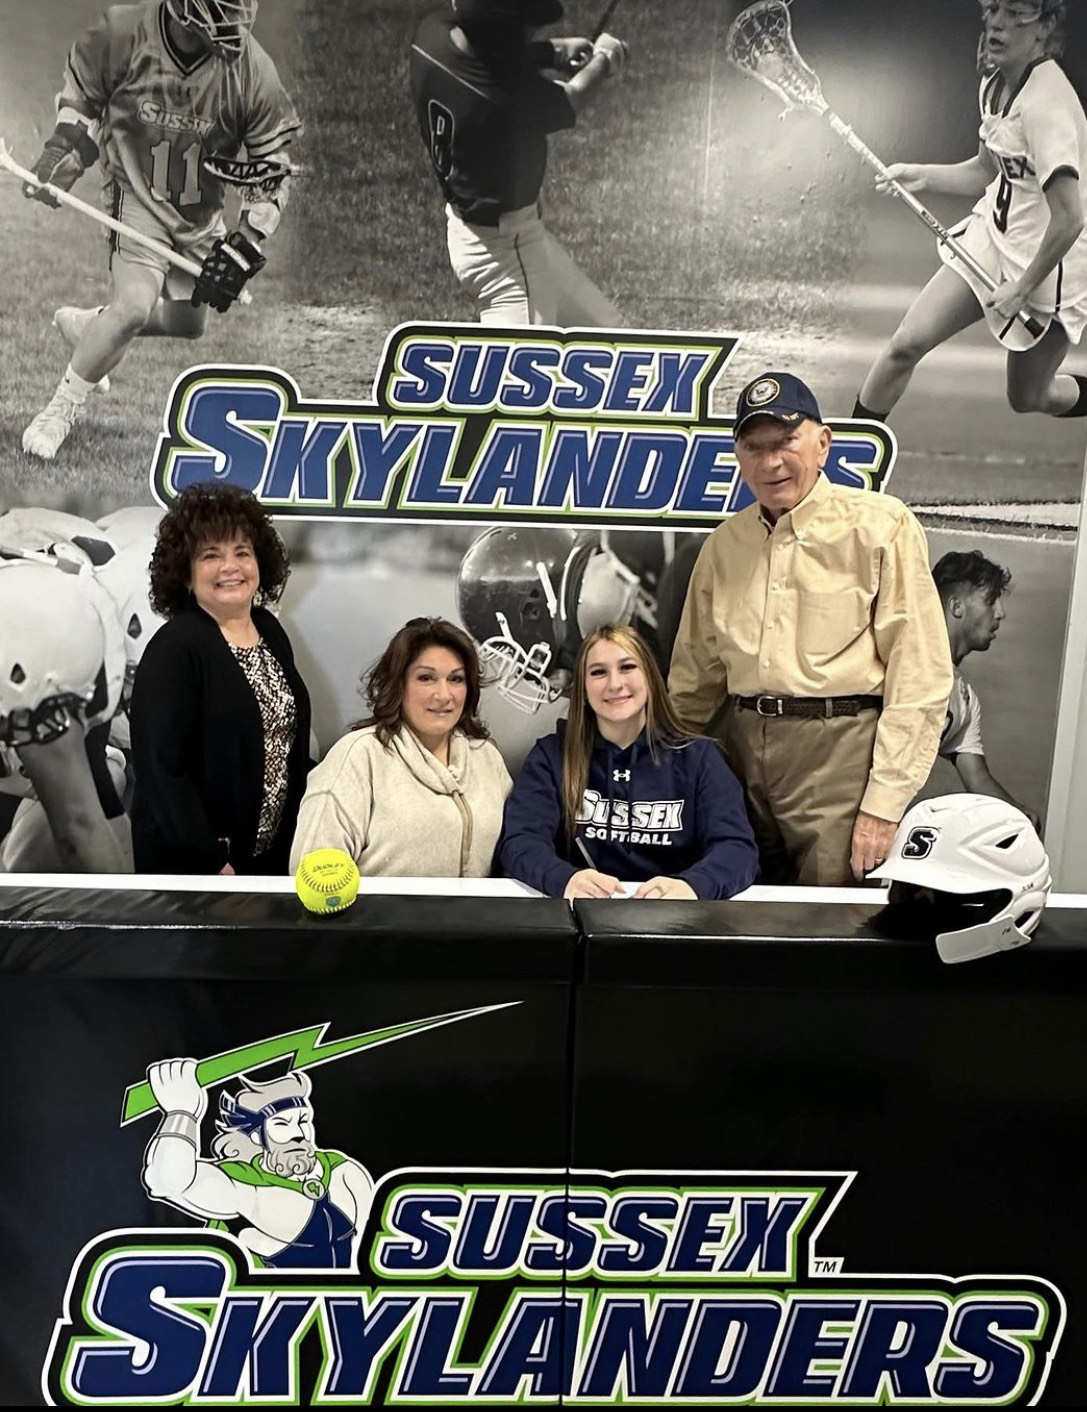 M. Jennings Signs with Sussex Softball